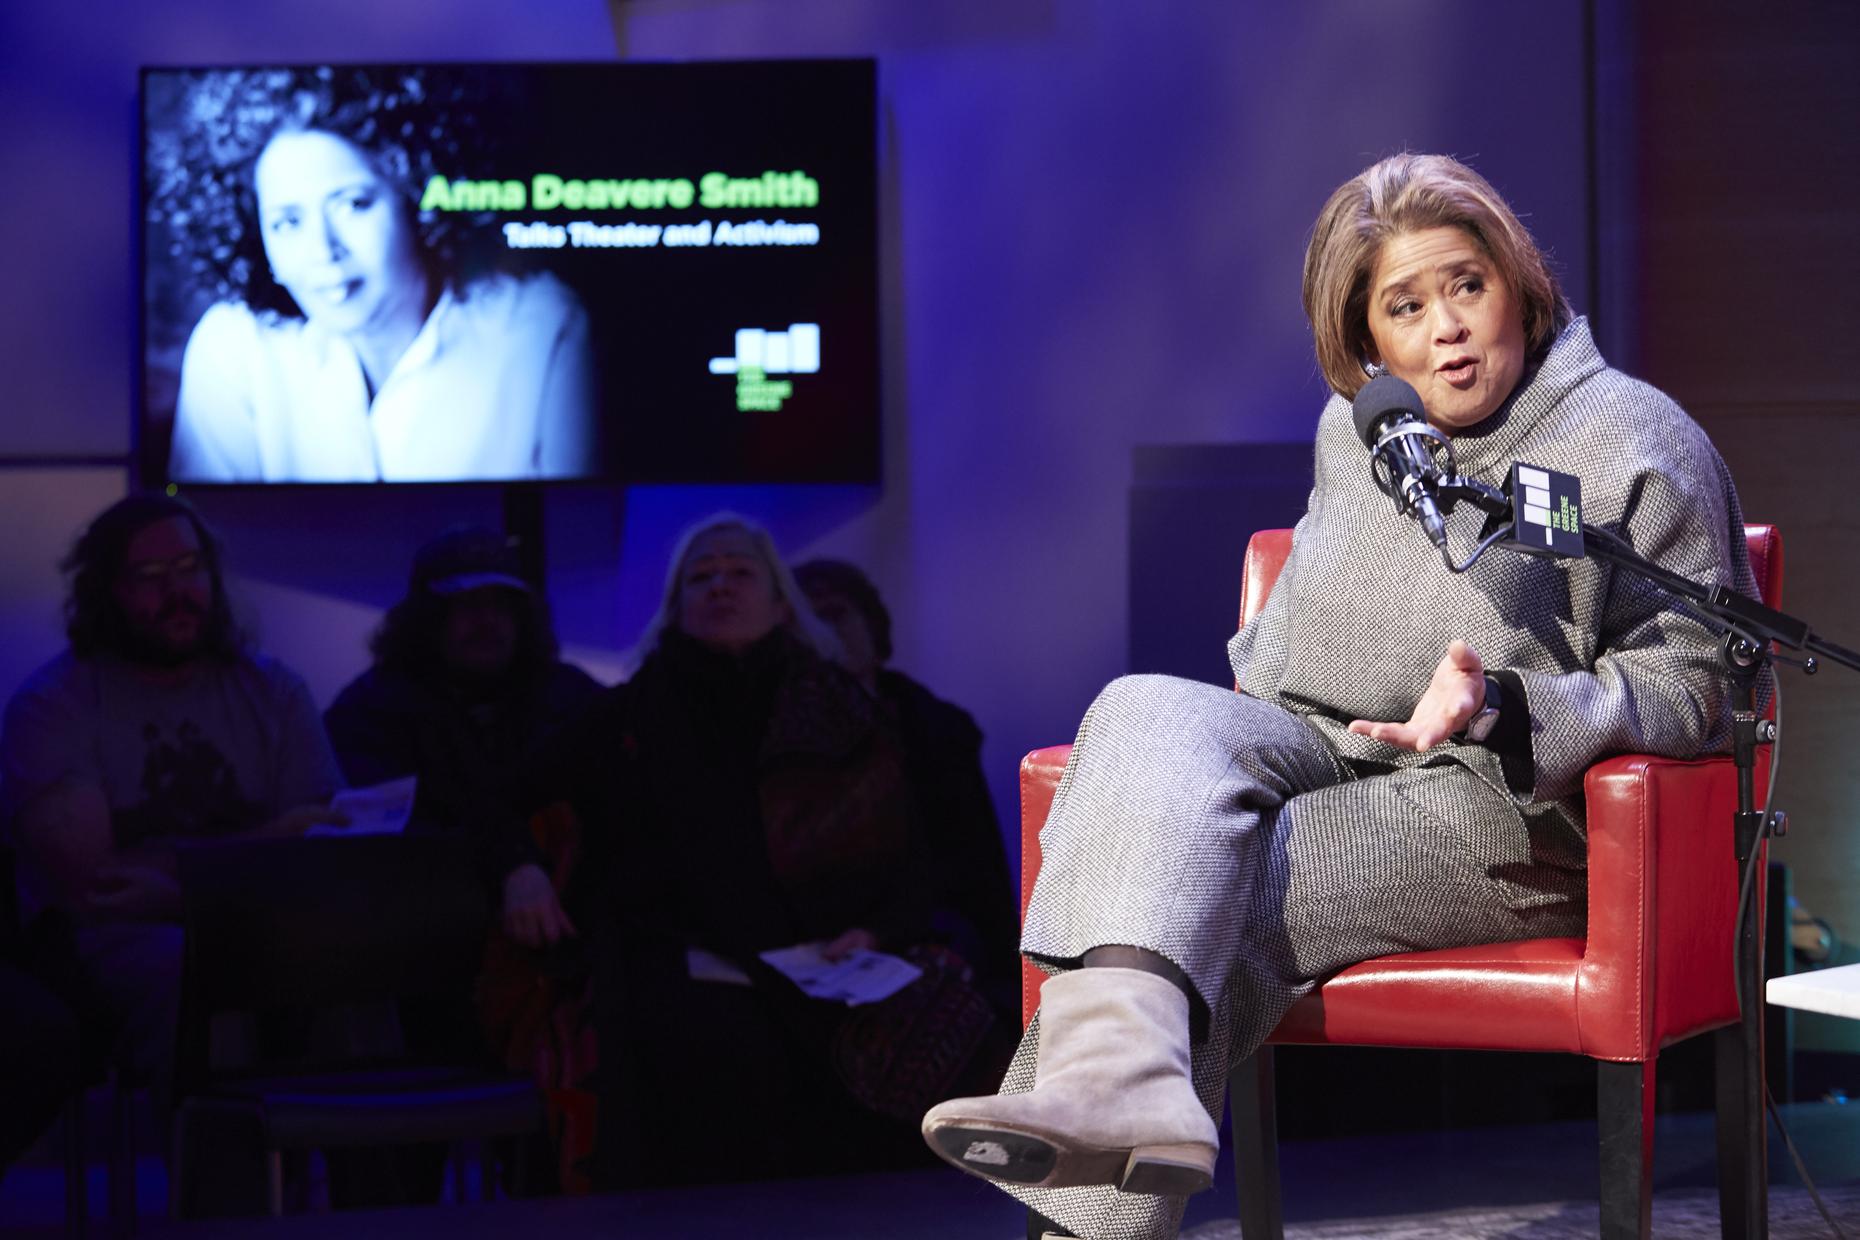 Anna Deavere Smith: ‘I’m Not an Activist. My Job Is to Present Multiple Points of View.’